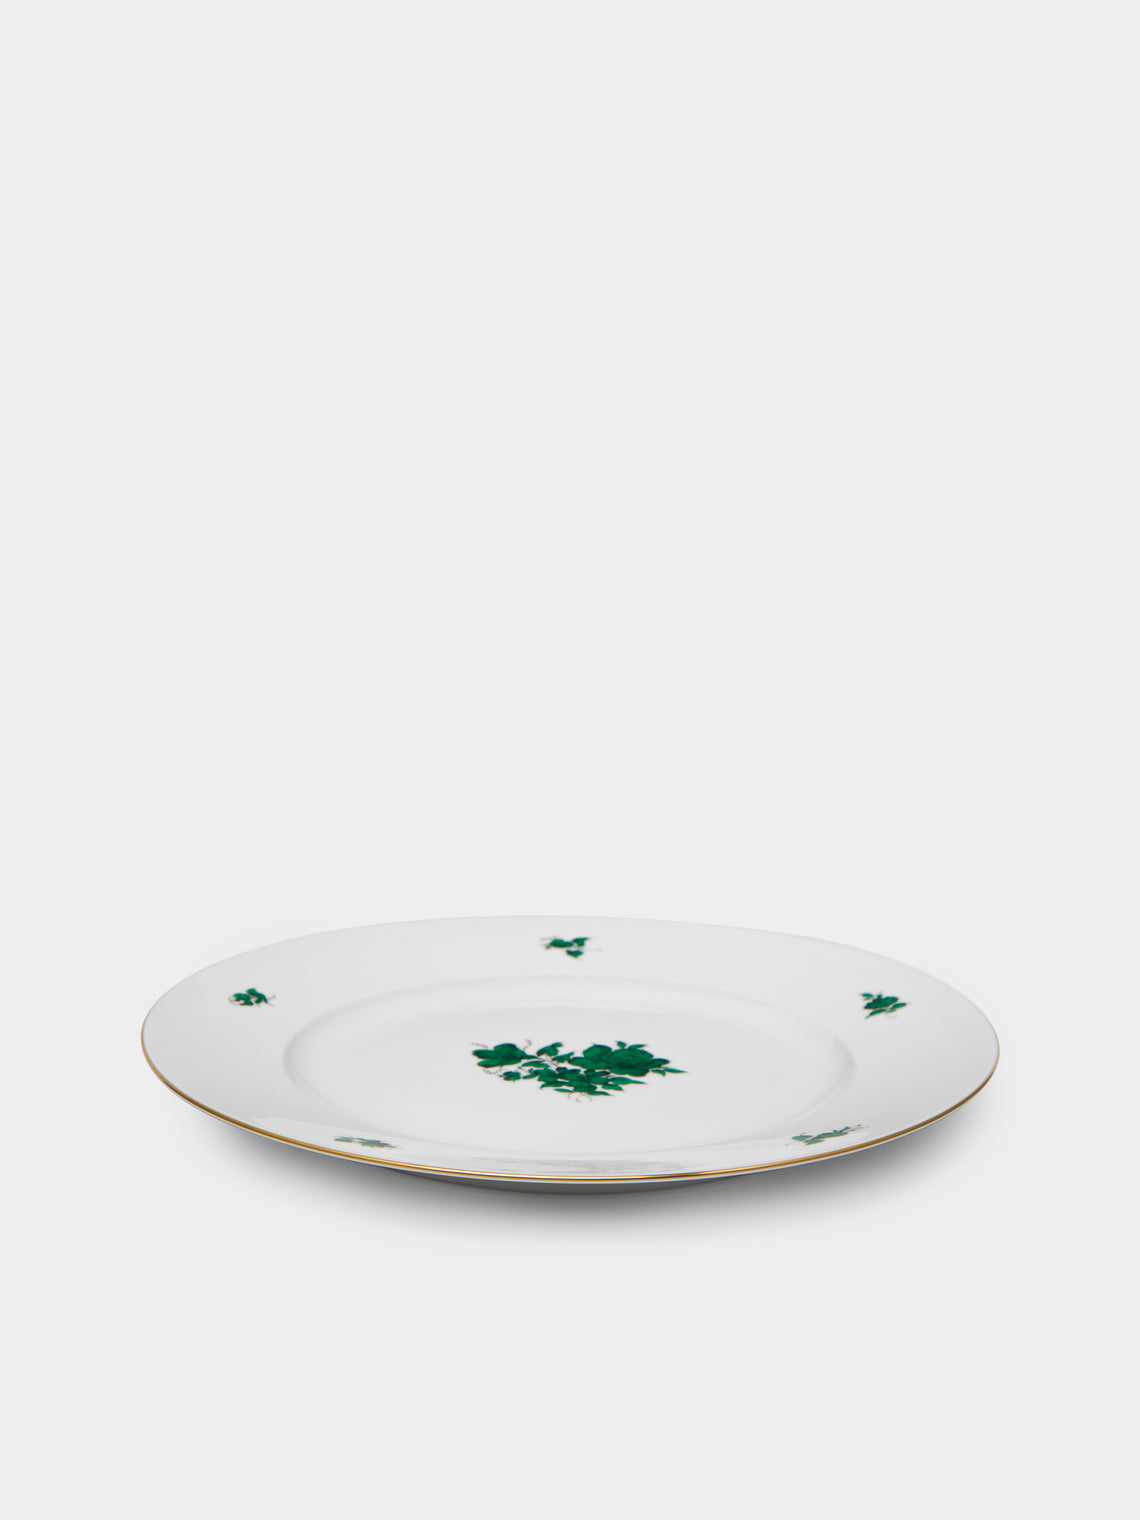 Augarten - Maria Theresia Hand-Painted Porcelain Dinner Plate -  - ABASK